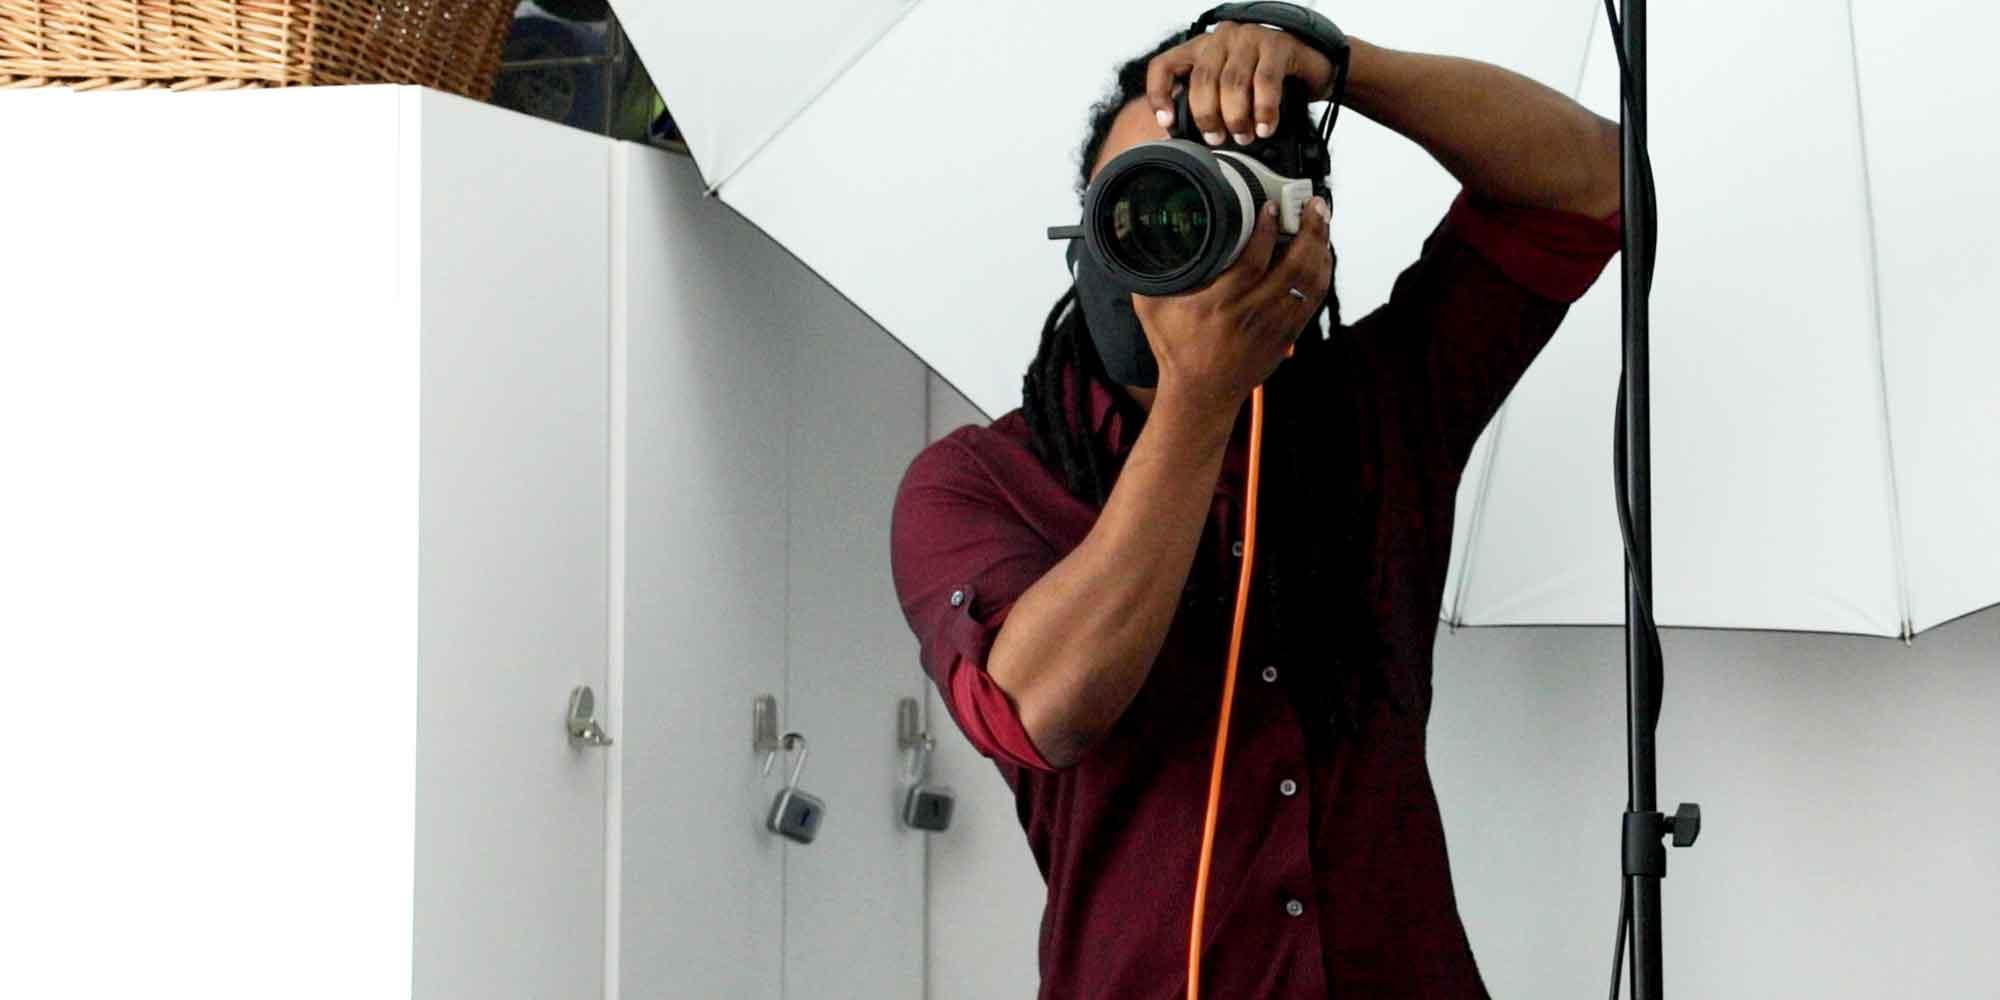 Top Ship & Shoot Product Photography Experts Will Boost Your e-Commerce Sales